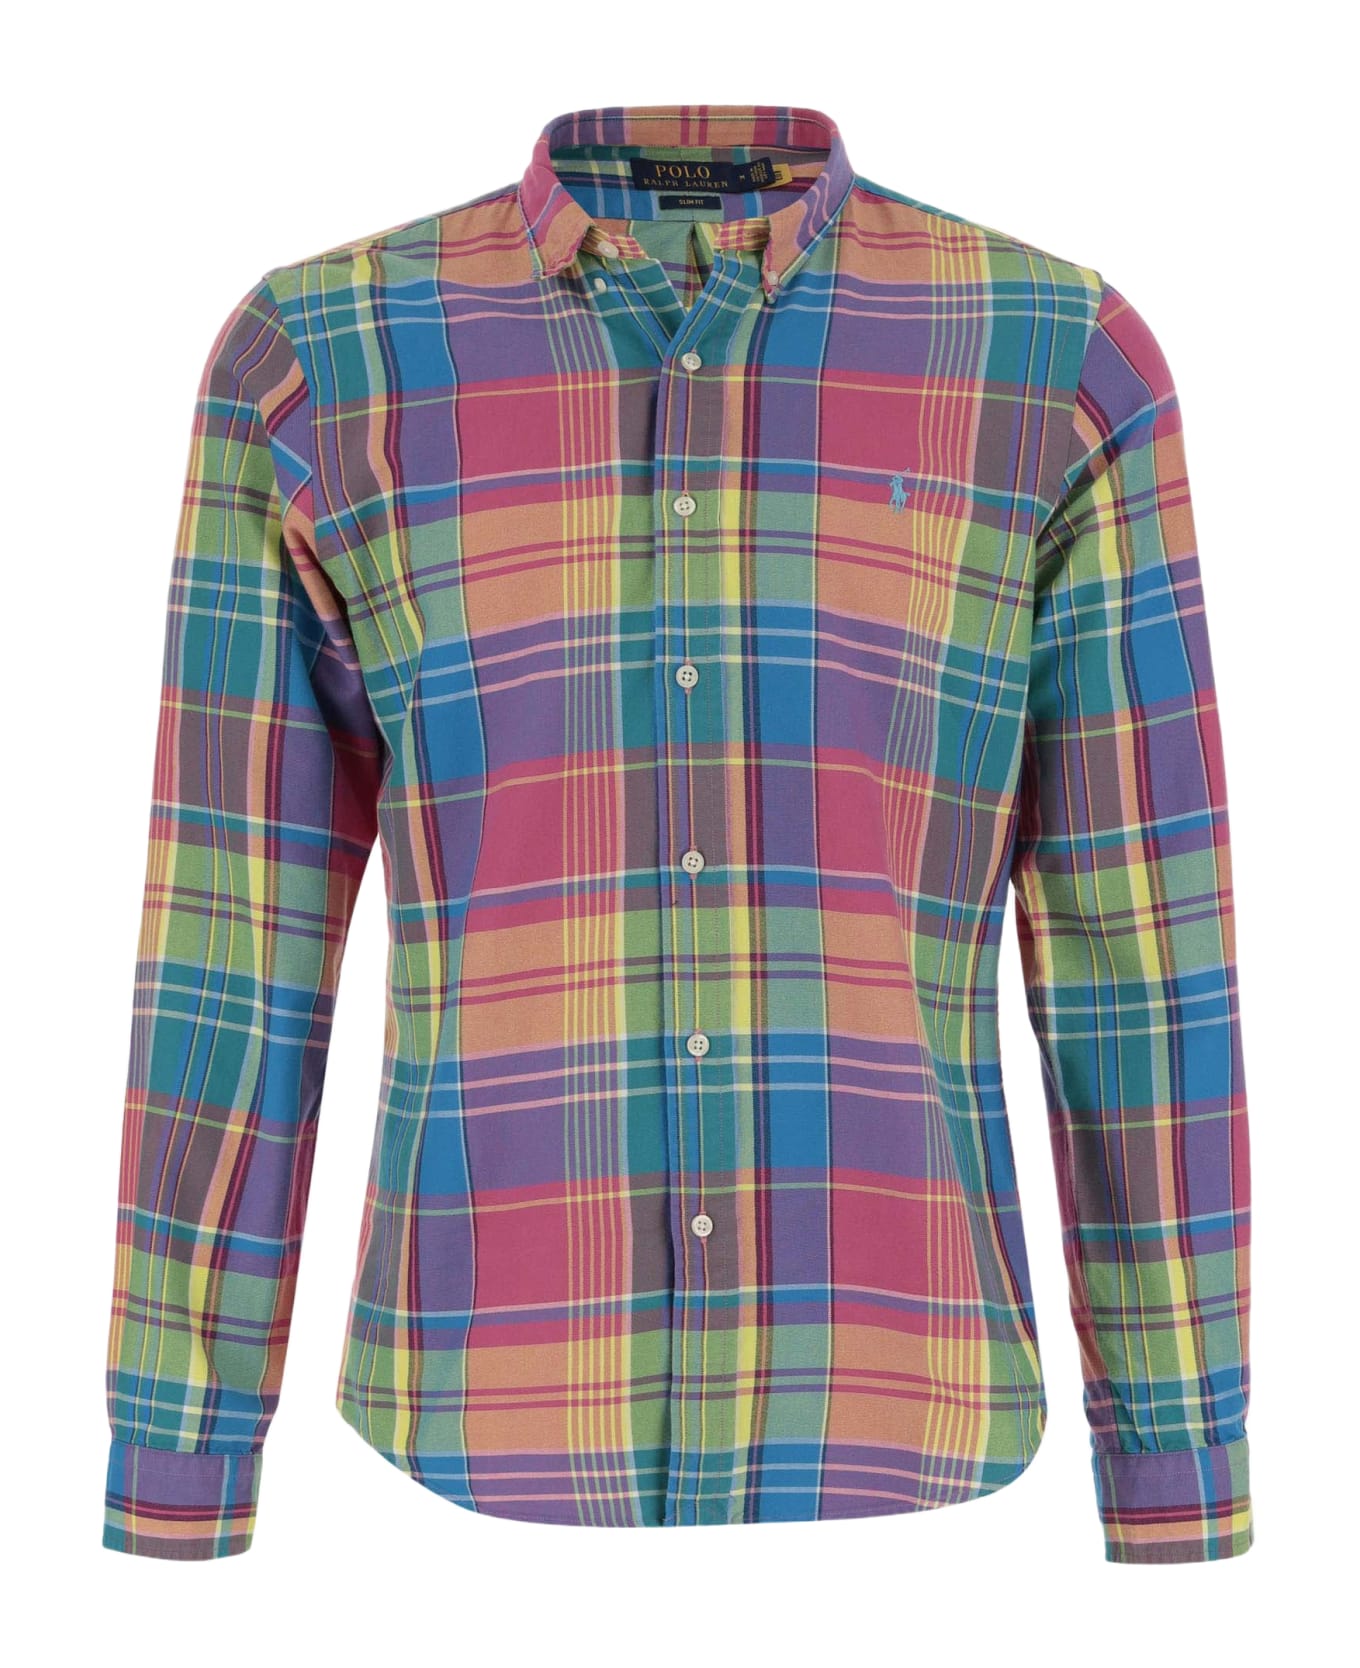 Polo Ralph Lauren Cotton Shirt With Check Pattern - Red